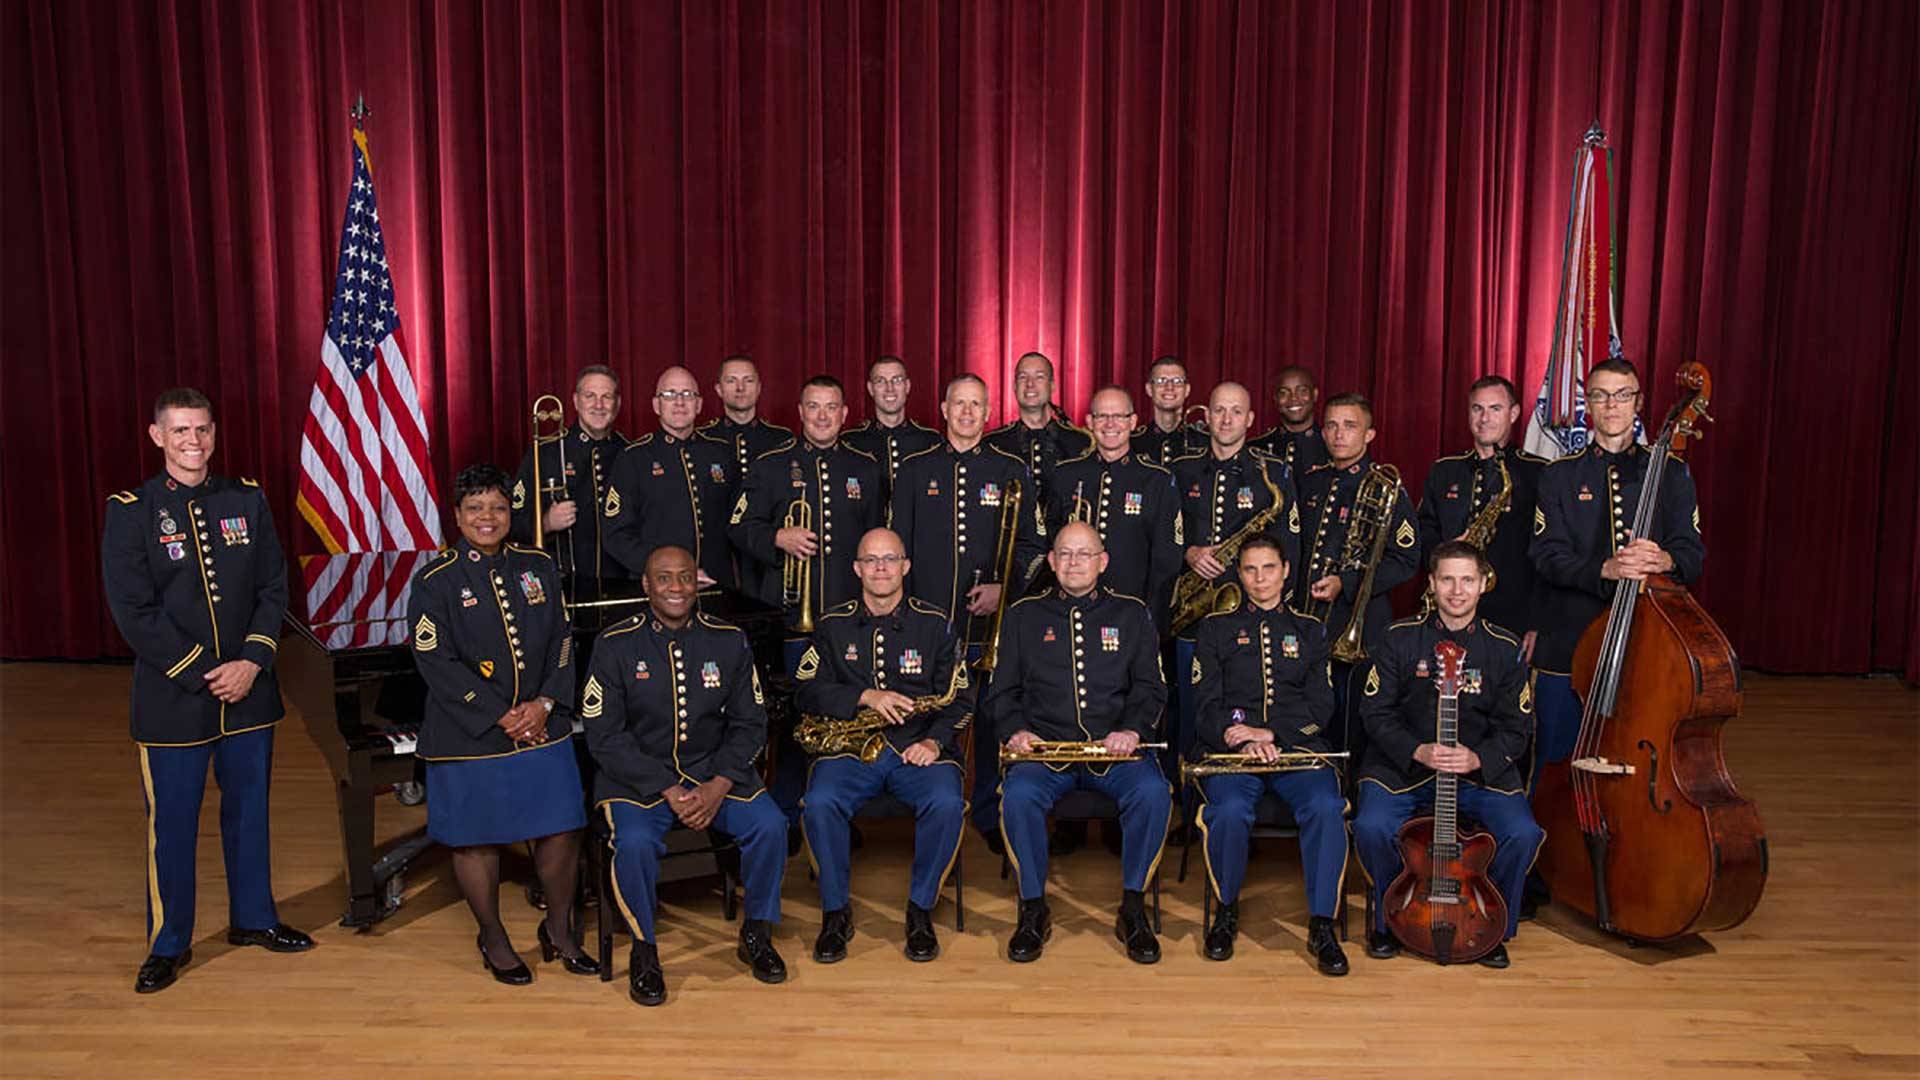 U.S. Army Field Band Jazz Ambassadors to perform free concert at Bayou Theater